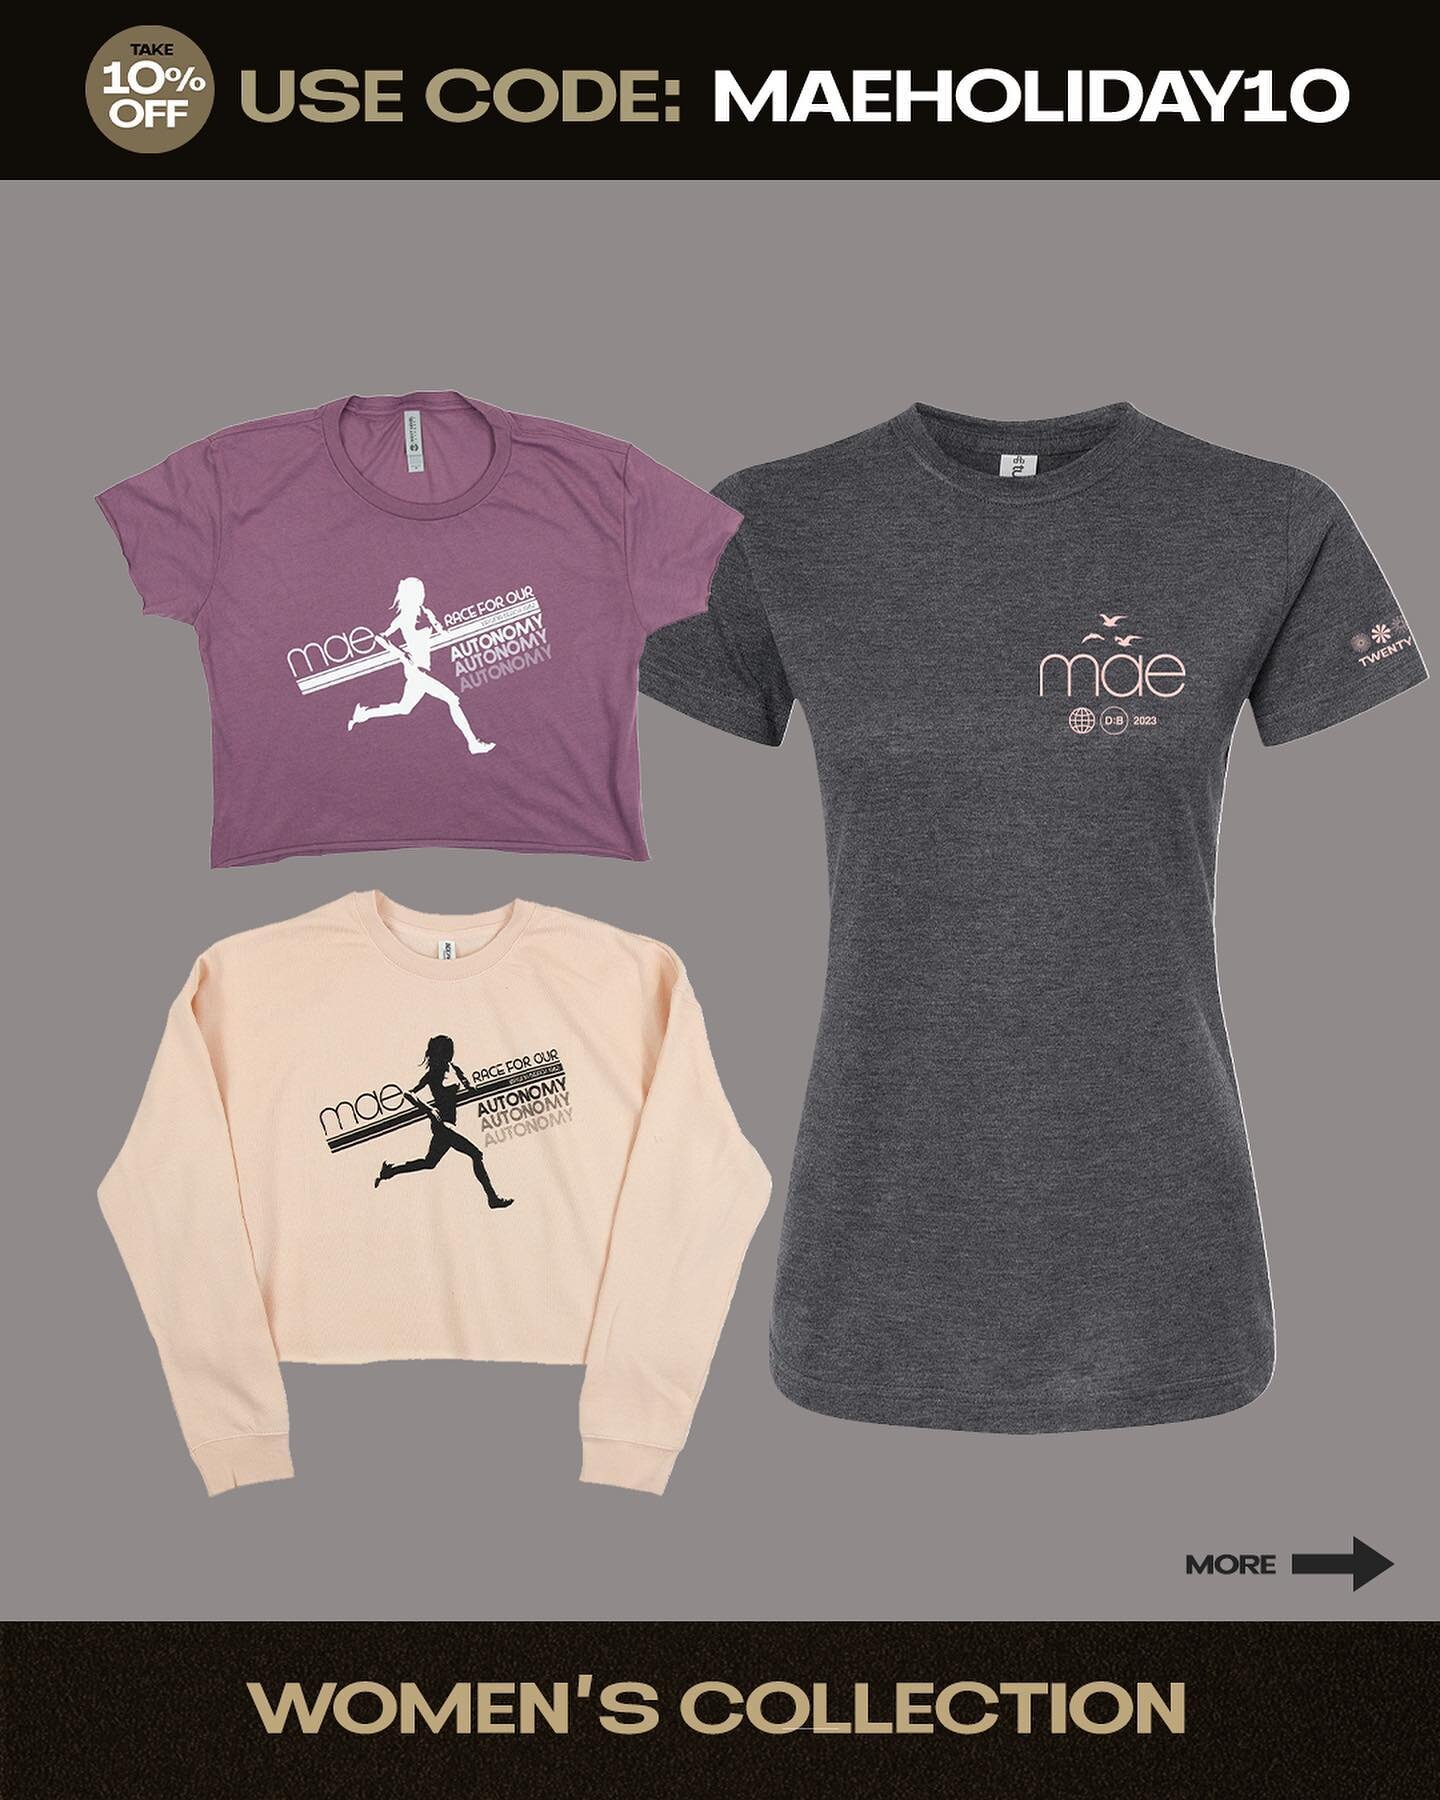 Mae&rsquo;s new Women&rsquo;s Collection is now LIVE at the new merch store! The collection includes a D:B 20 year tee with bird logo on front and 20 year detail on sleeve, Race for Our Autonomy festival crop tee and crop sweatshirt. Take 10% OFF now